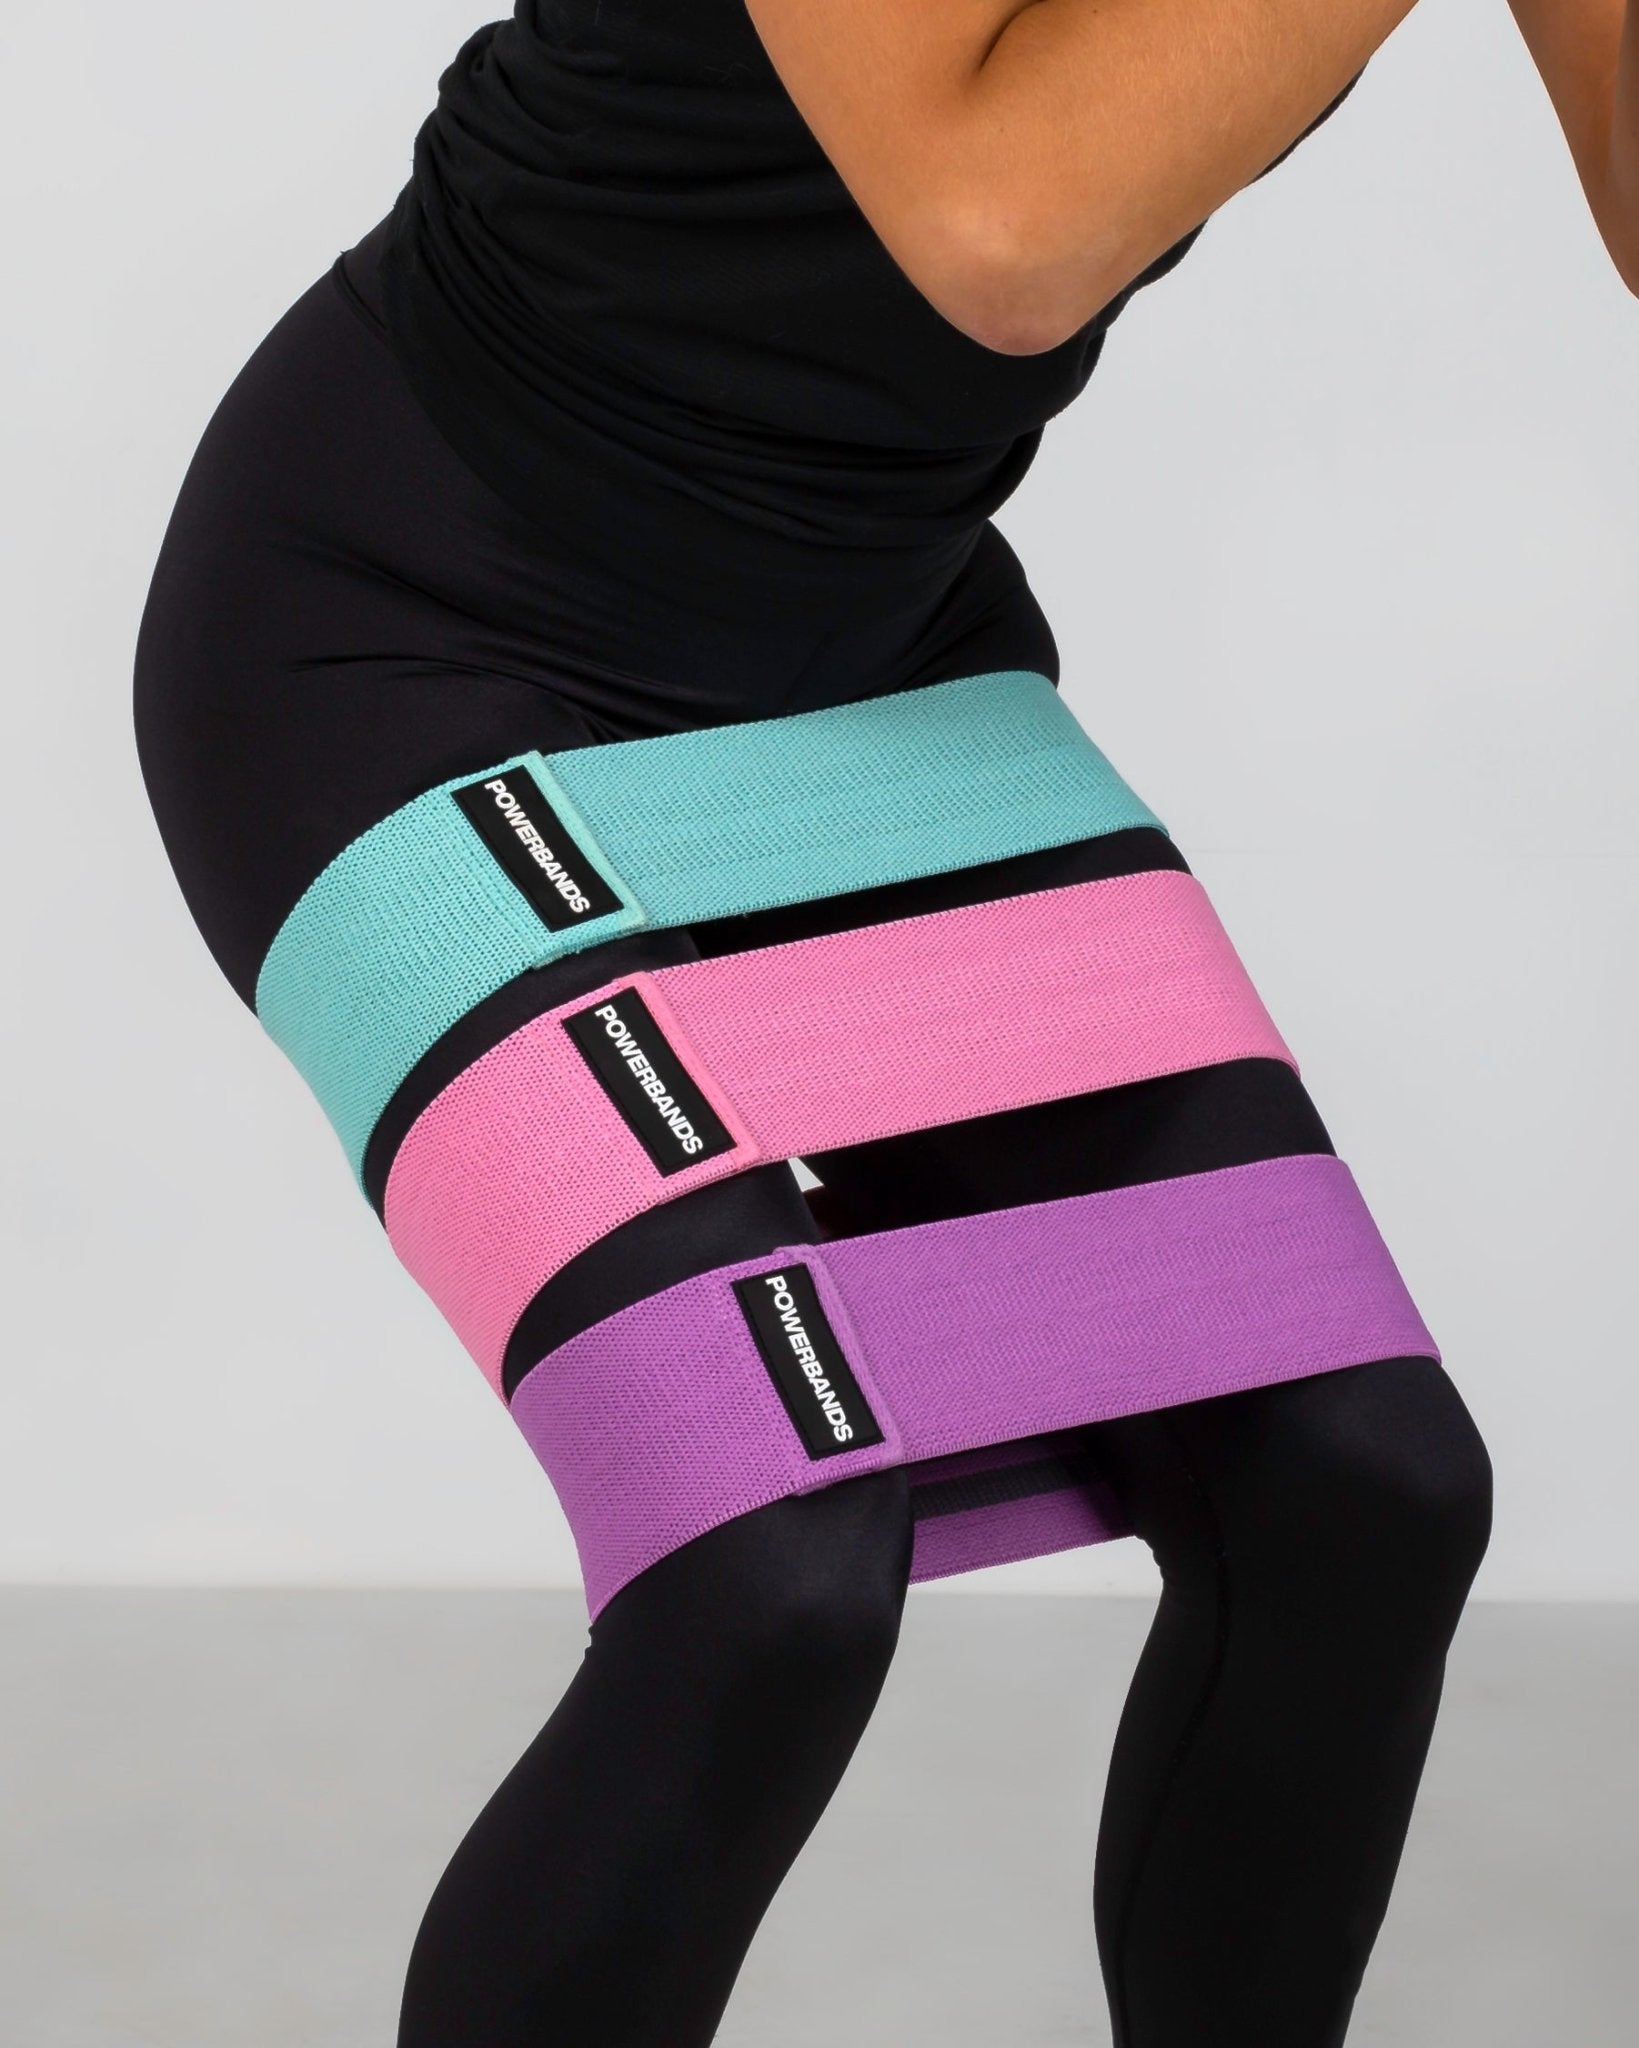 8 Awesome Resistance Band Benefits You Should Know - POWERBANDS®